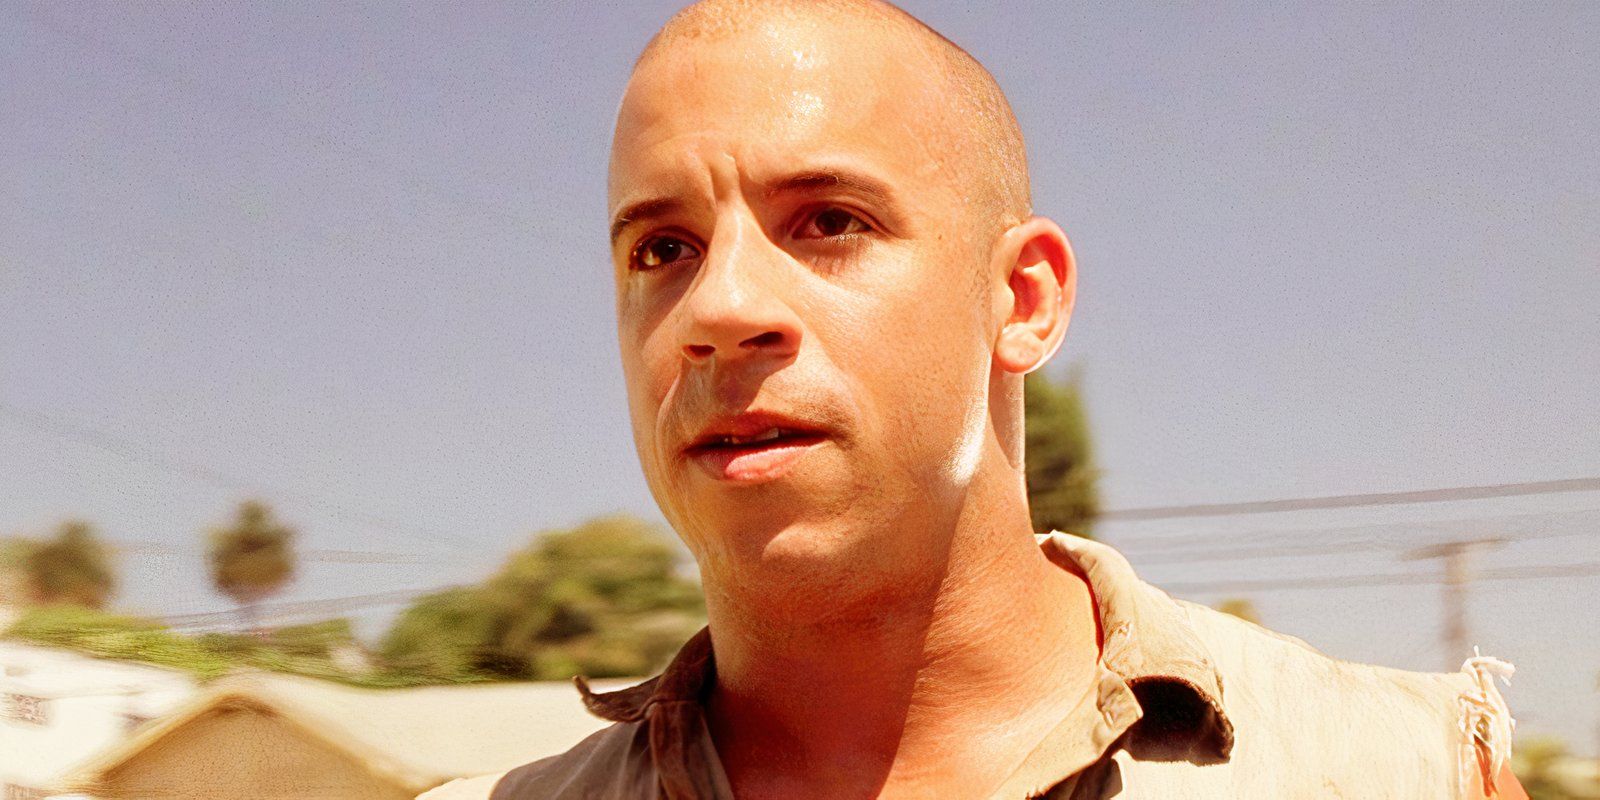 Vin Diesel as Dom Toretto in The Fast and the Furious